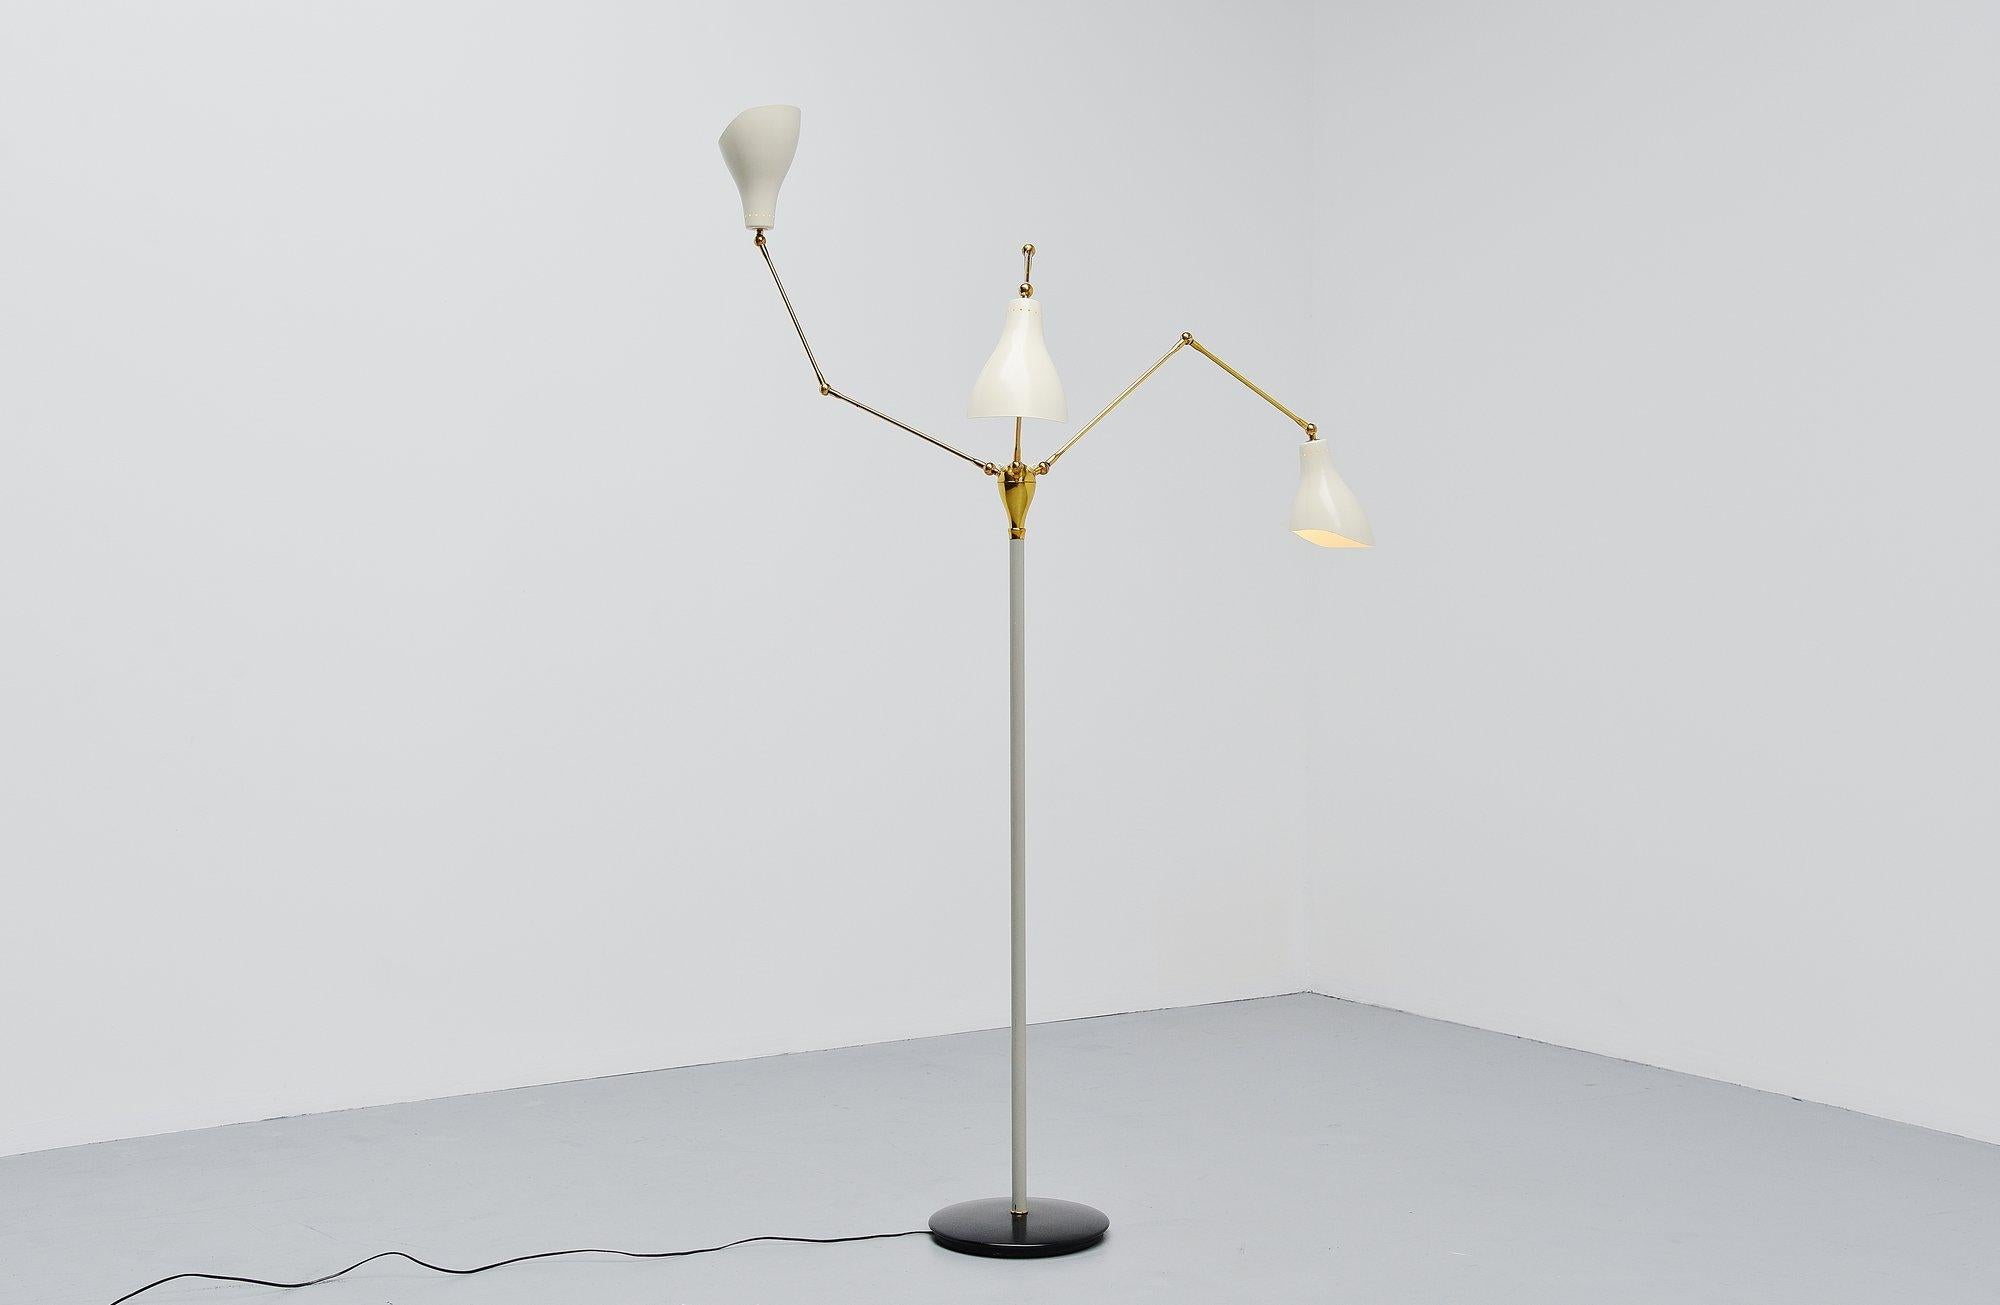 Fantastic three-armed adjustable standard lamp designed by Angelo-Lelli and manufactured by Arredoluce, Monza, Italy, 1950.This fantastic adjustable floor lamp is super nice large shaped and has three fully adjustable arms. This superb quality lamp